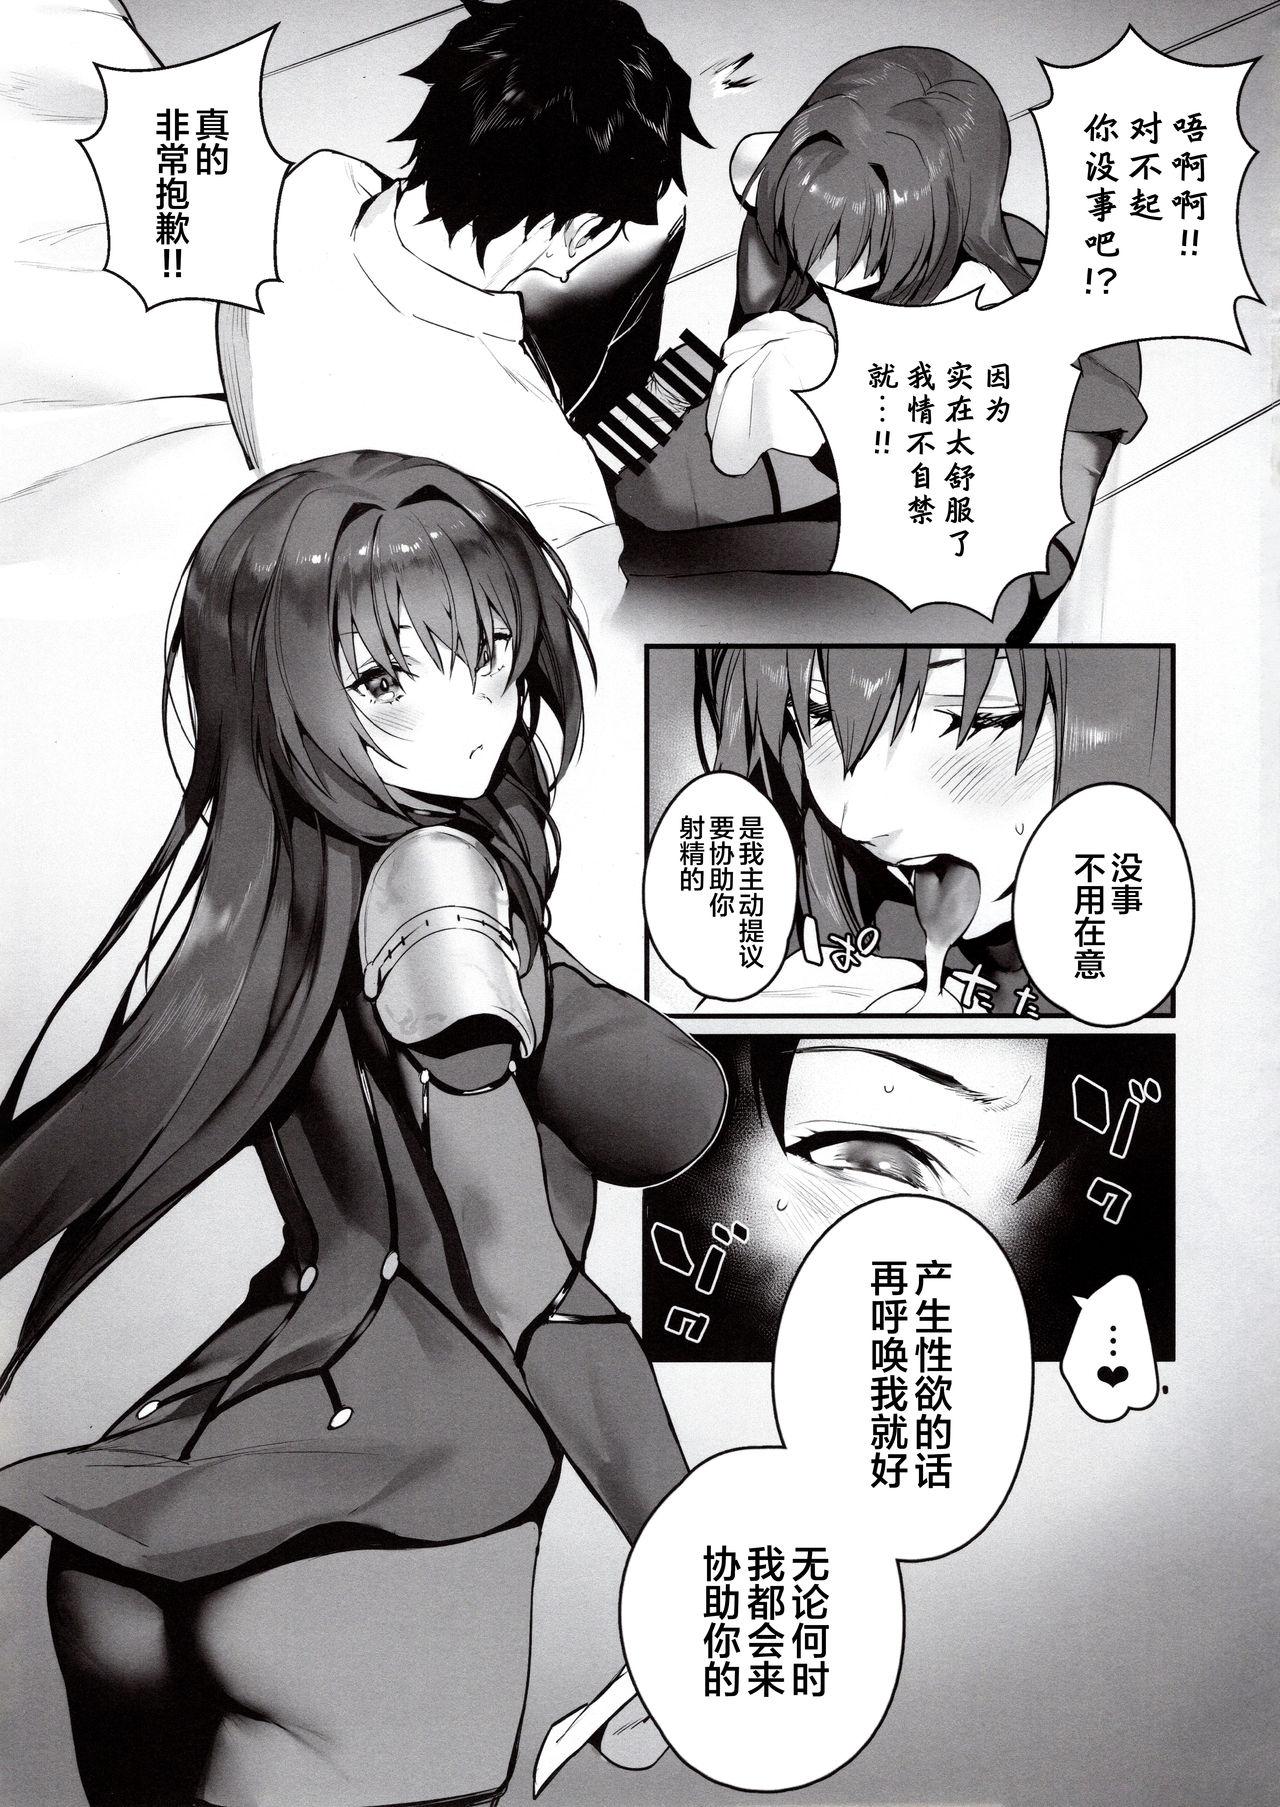 Youth Porn MOVE ON UP - Fate grand order Girlfriends - Page 6